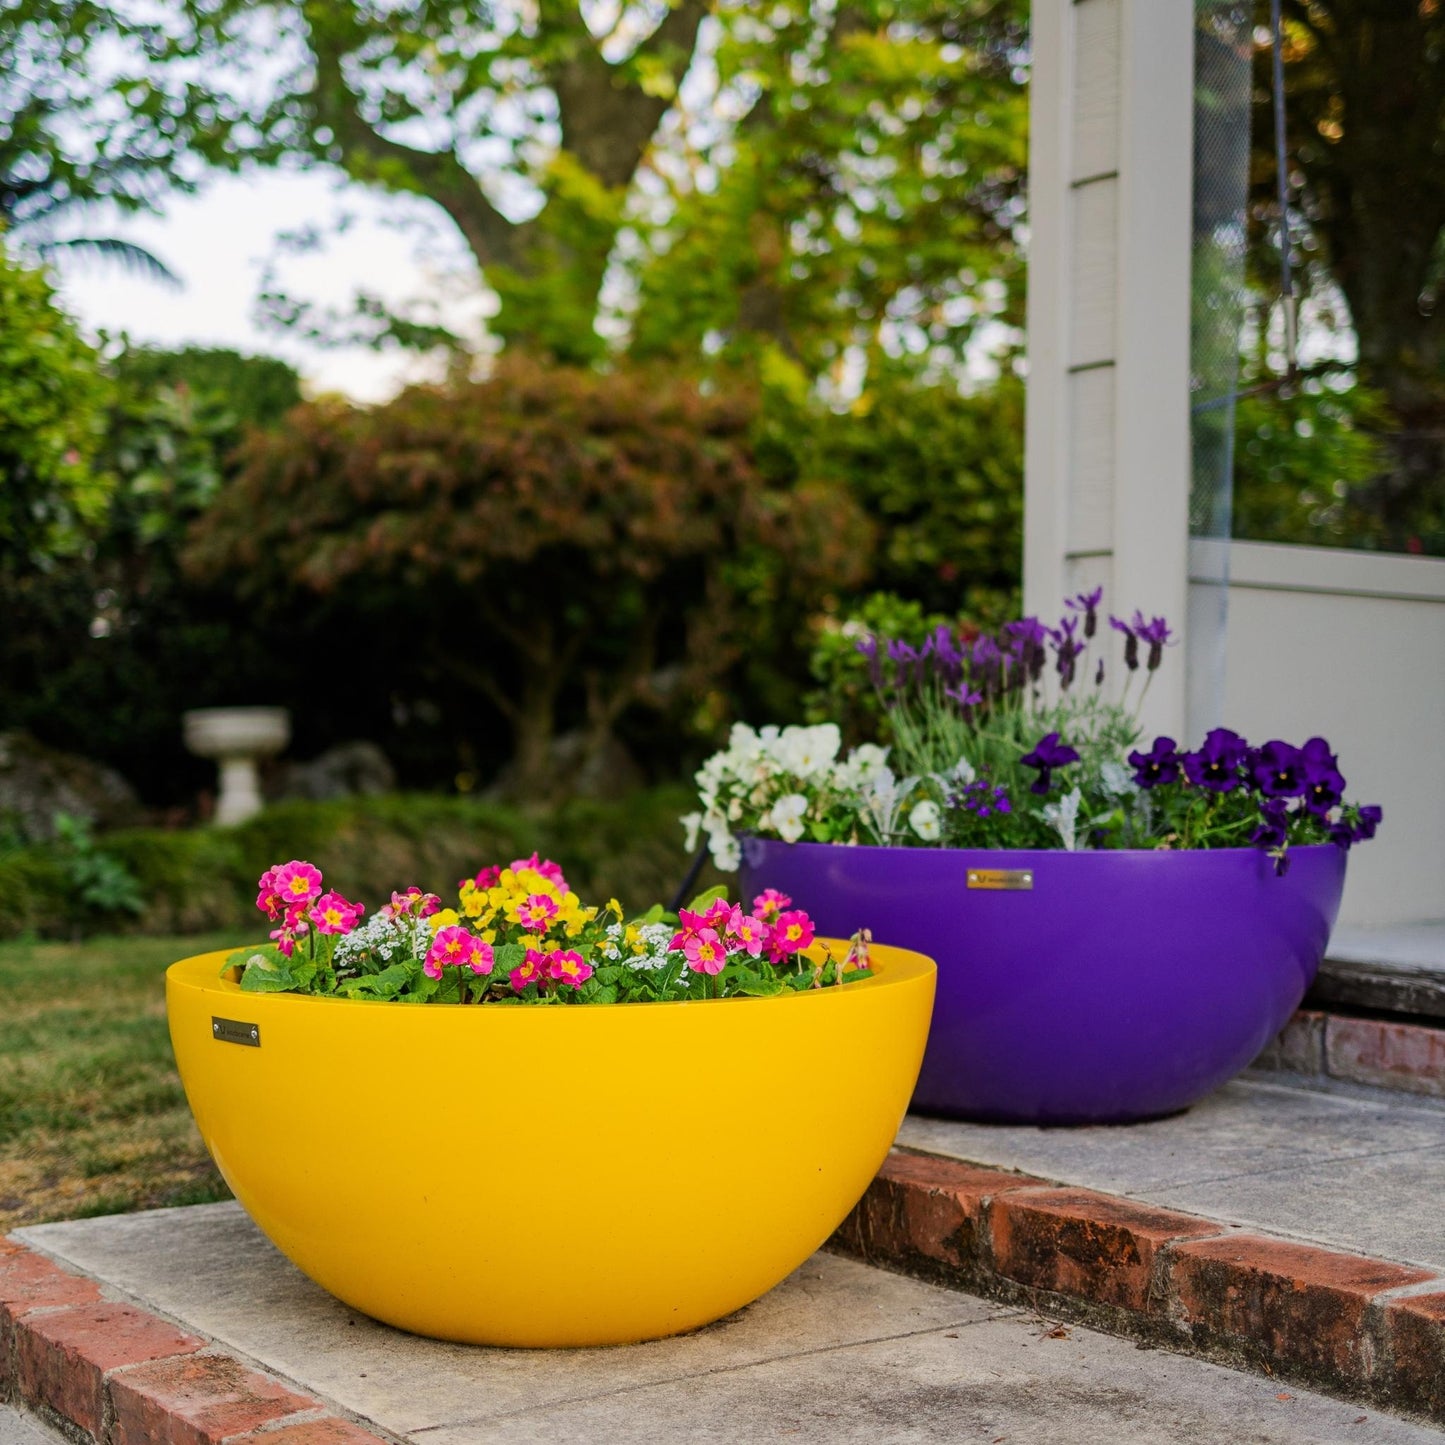 Large purple and yellow Modscene bowl planter pots on a nice brick staircase. The pots are plated with flowers for a colourful effect.